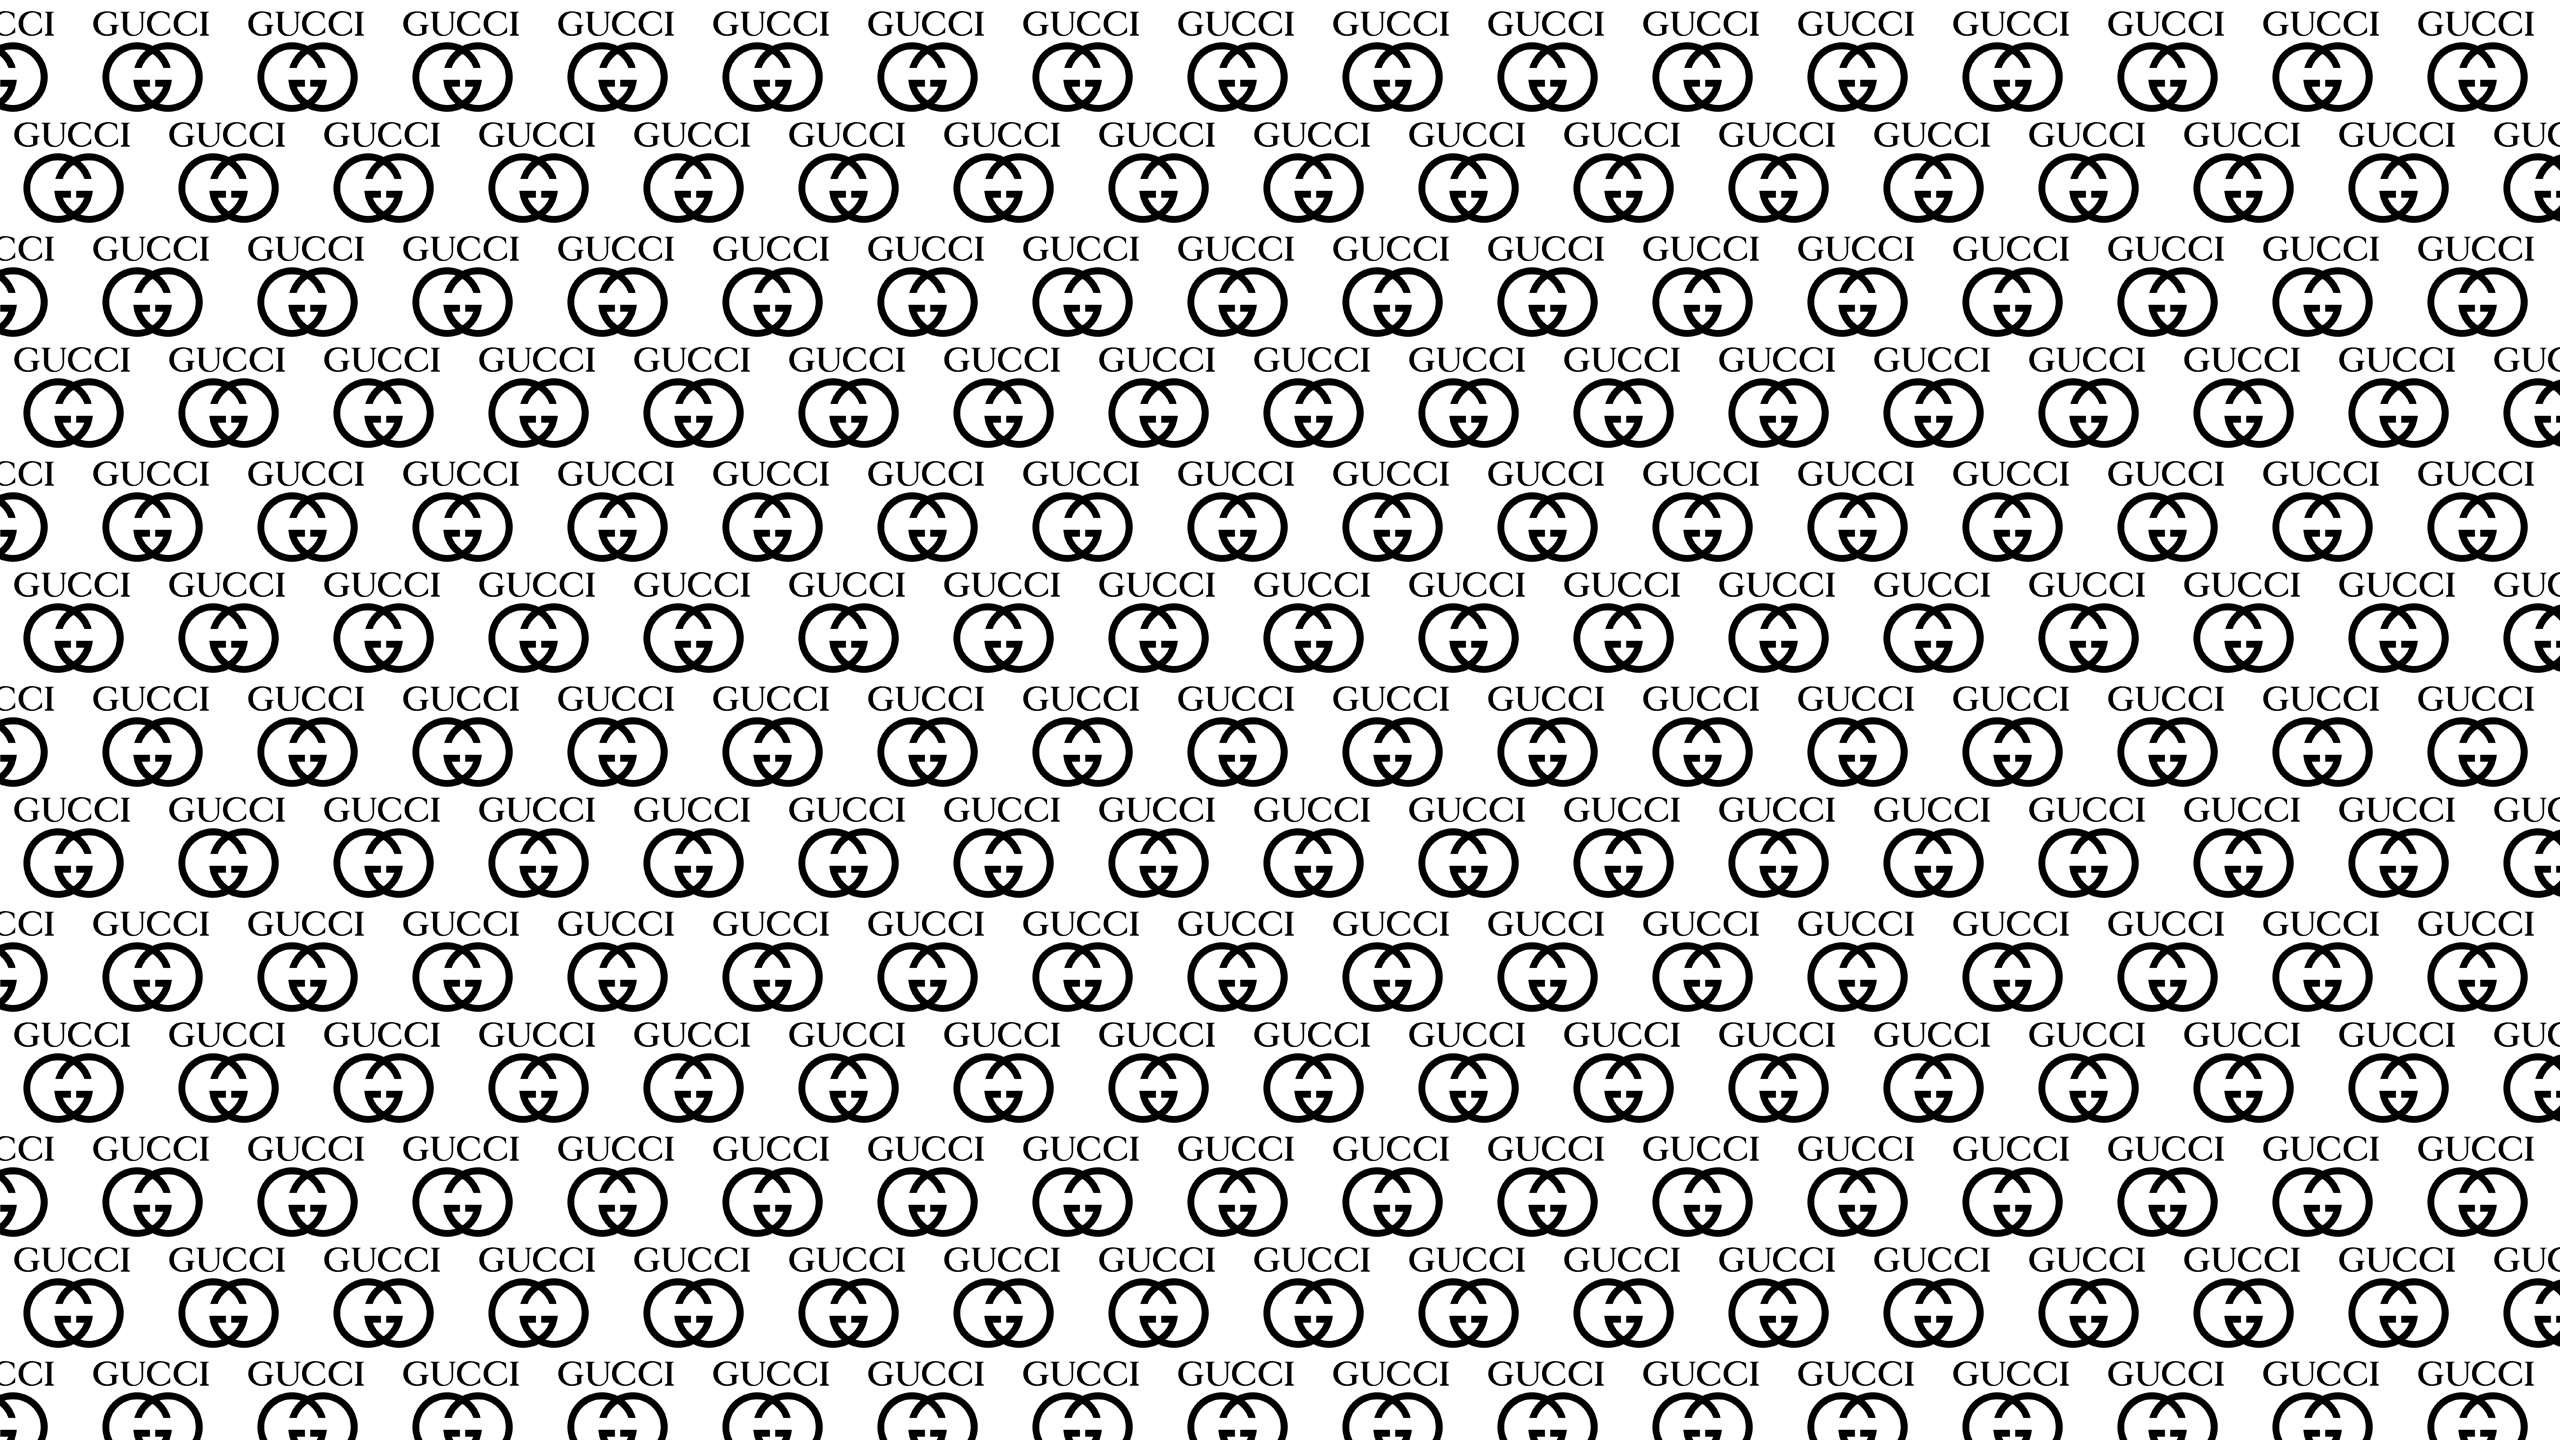 Gucci: Black and white, Repeating pattern, The iconic brand, Logo. 2560x1440 HD Wallpaper.